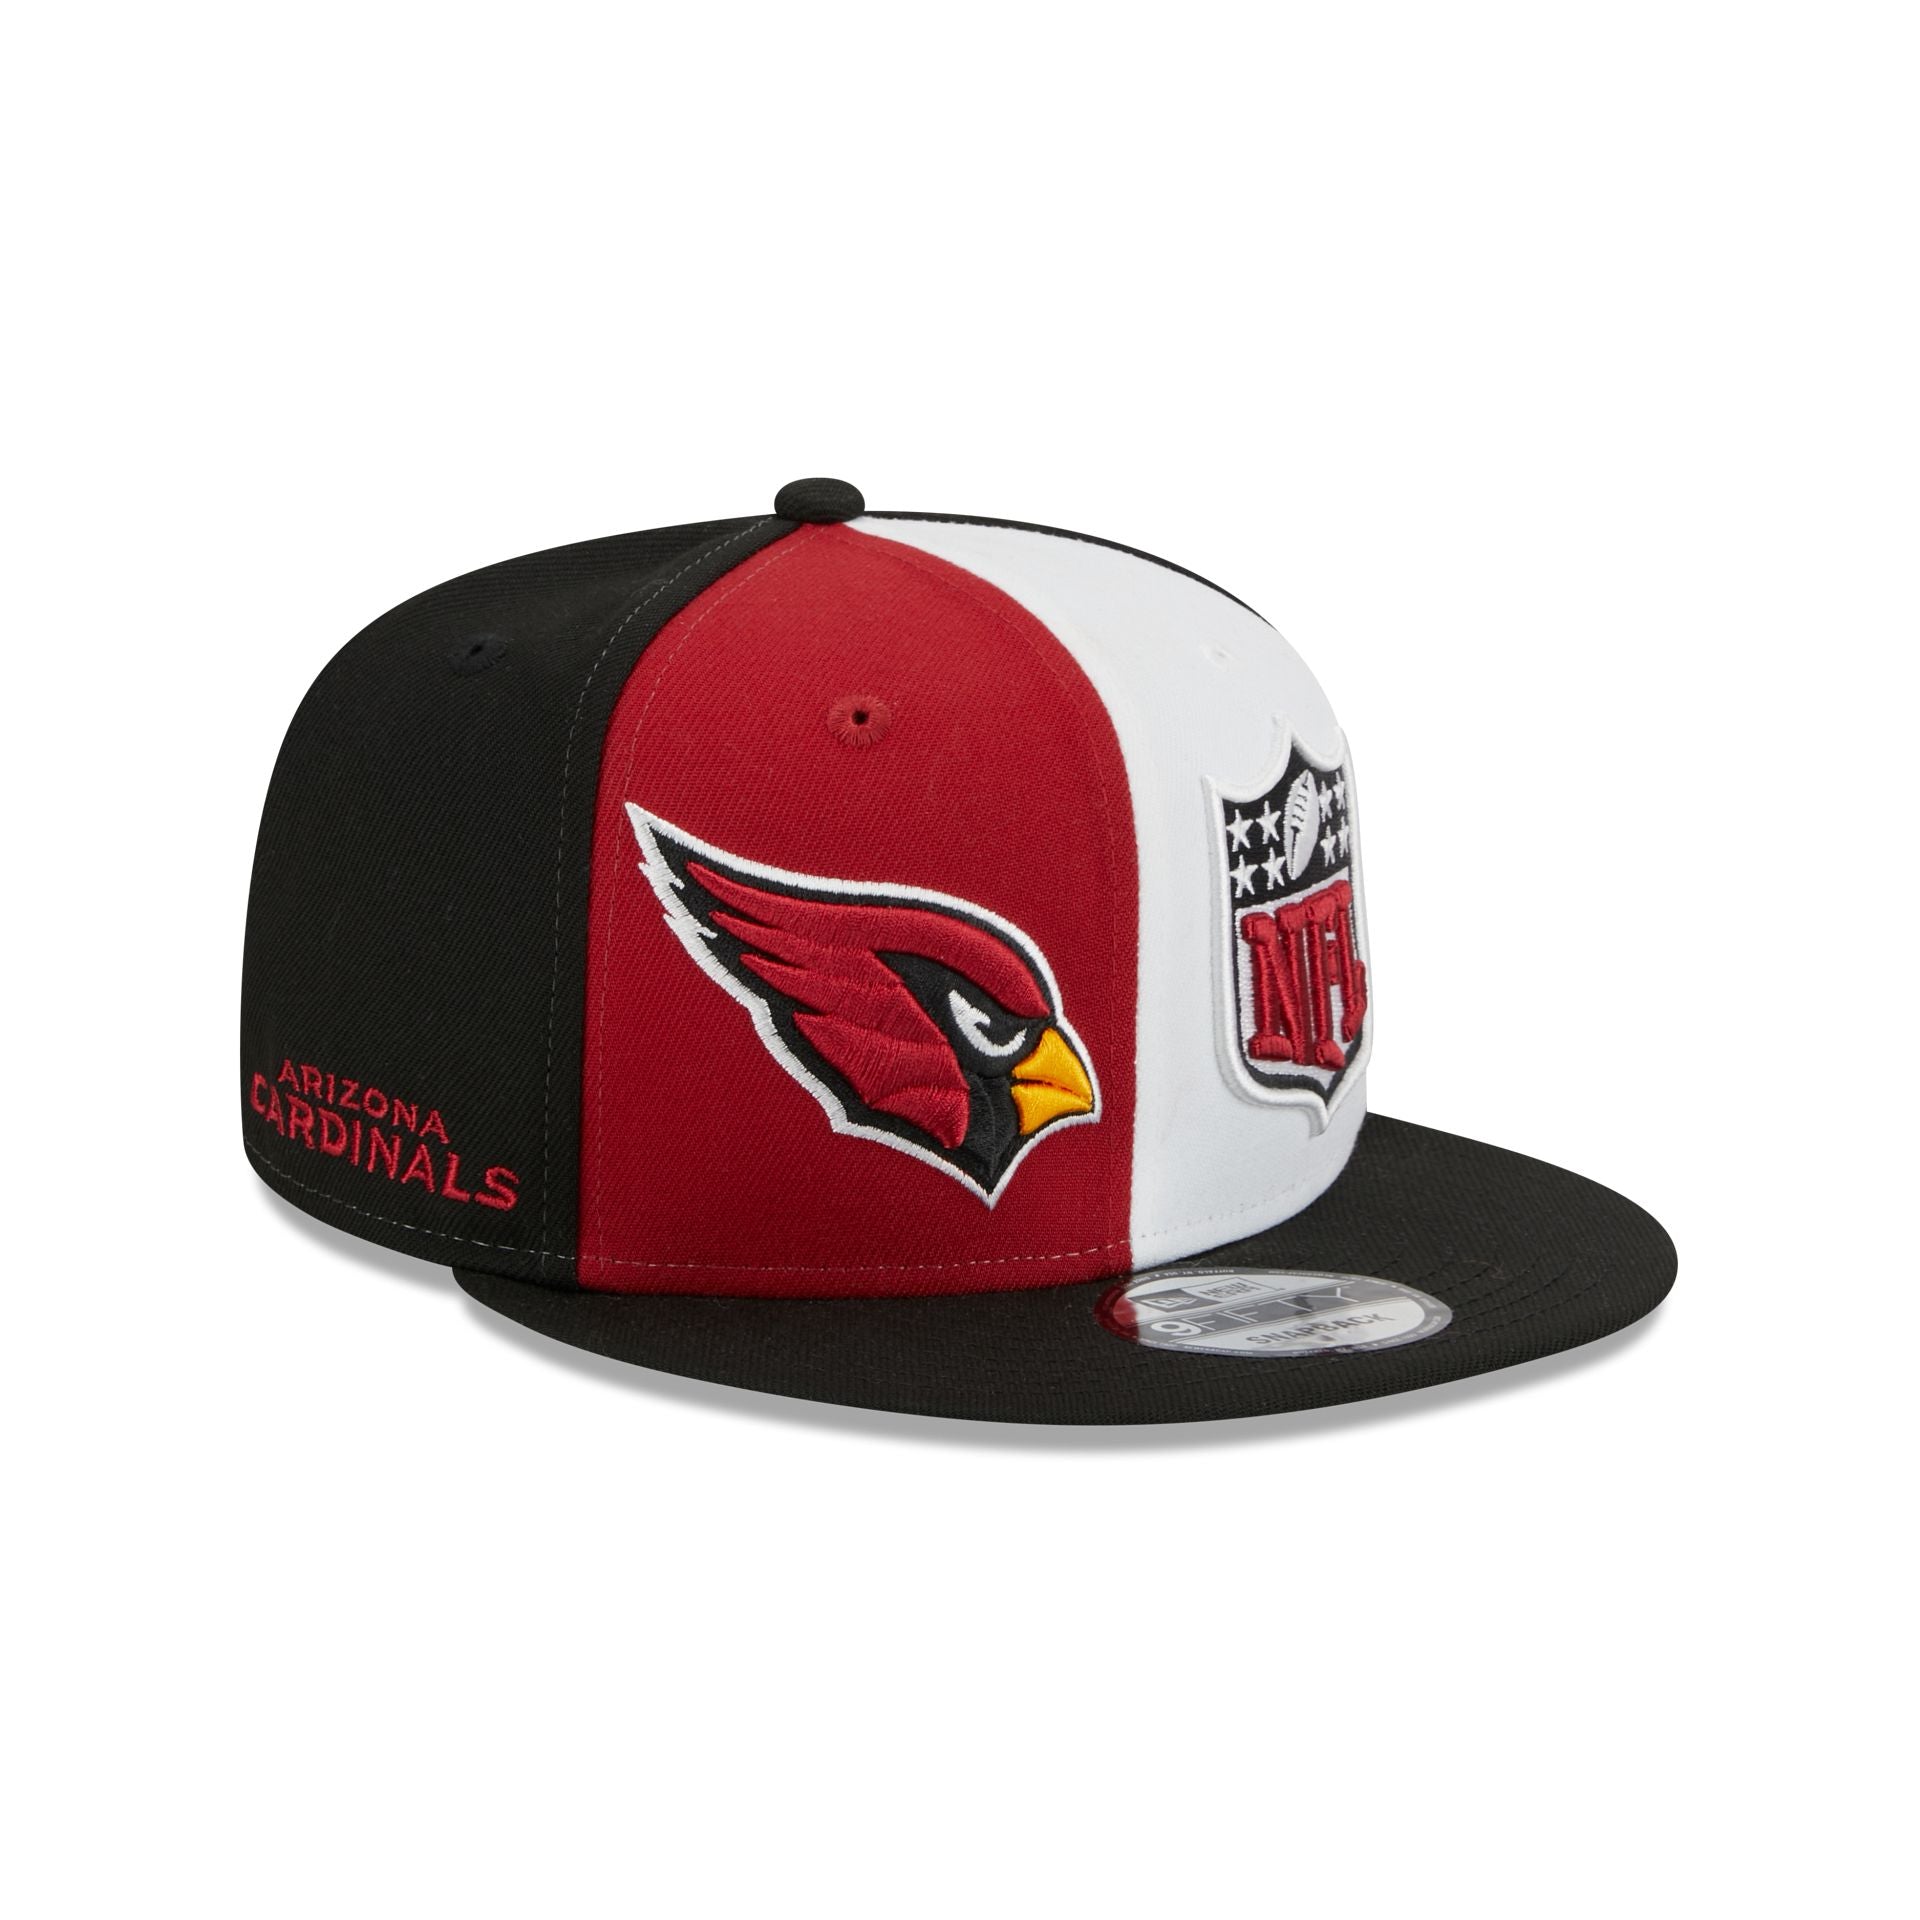 Louisville Hats, Snapback and Sideline Hat, Louisville Cardinals Caps